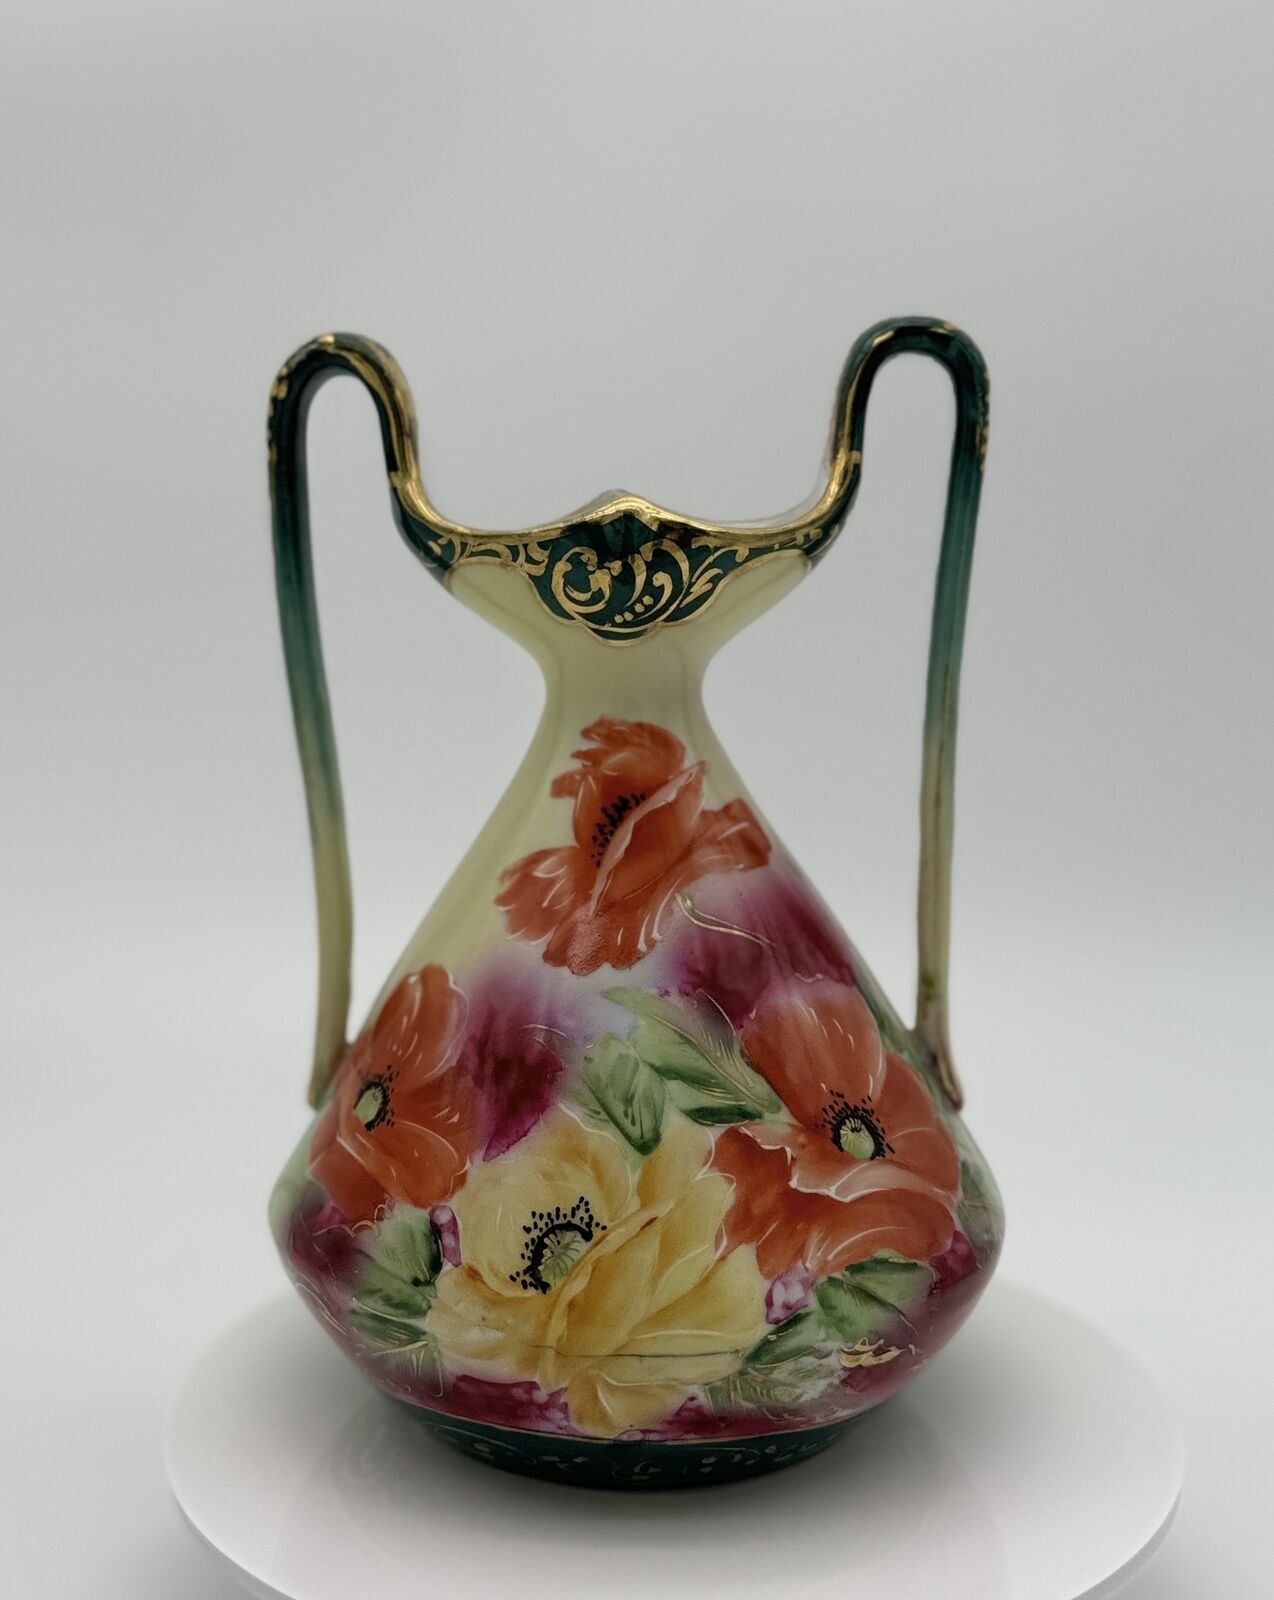 Rare Limoges Hand-Painted Porcelain Vase with Intricate Floral Design